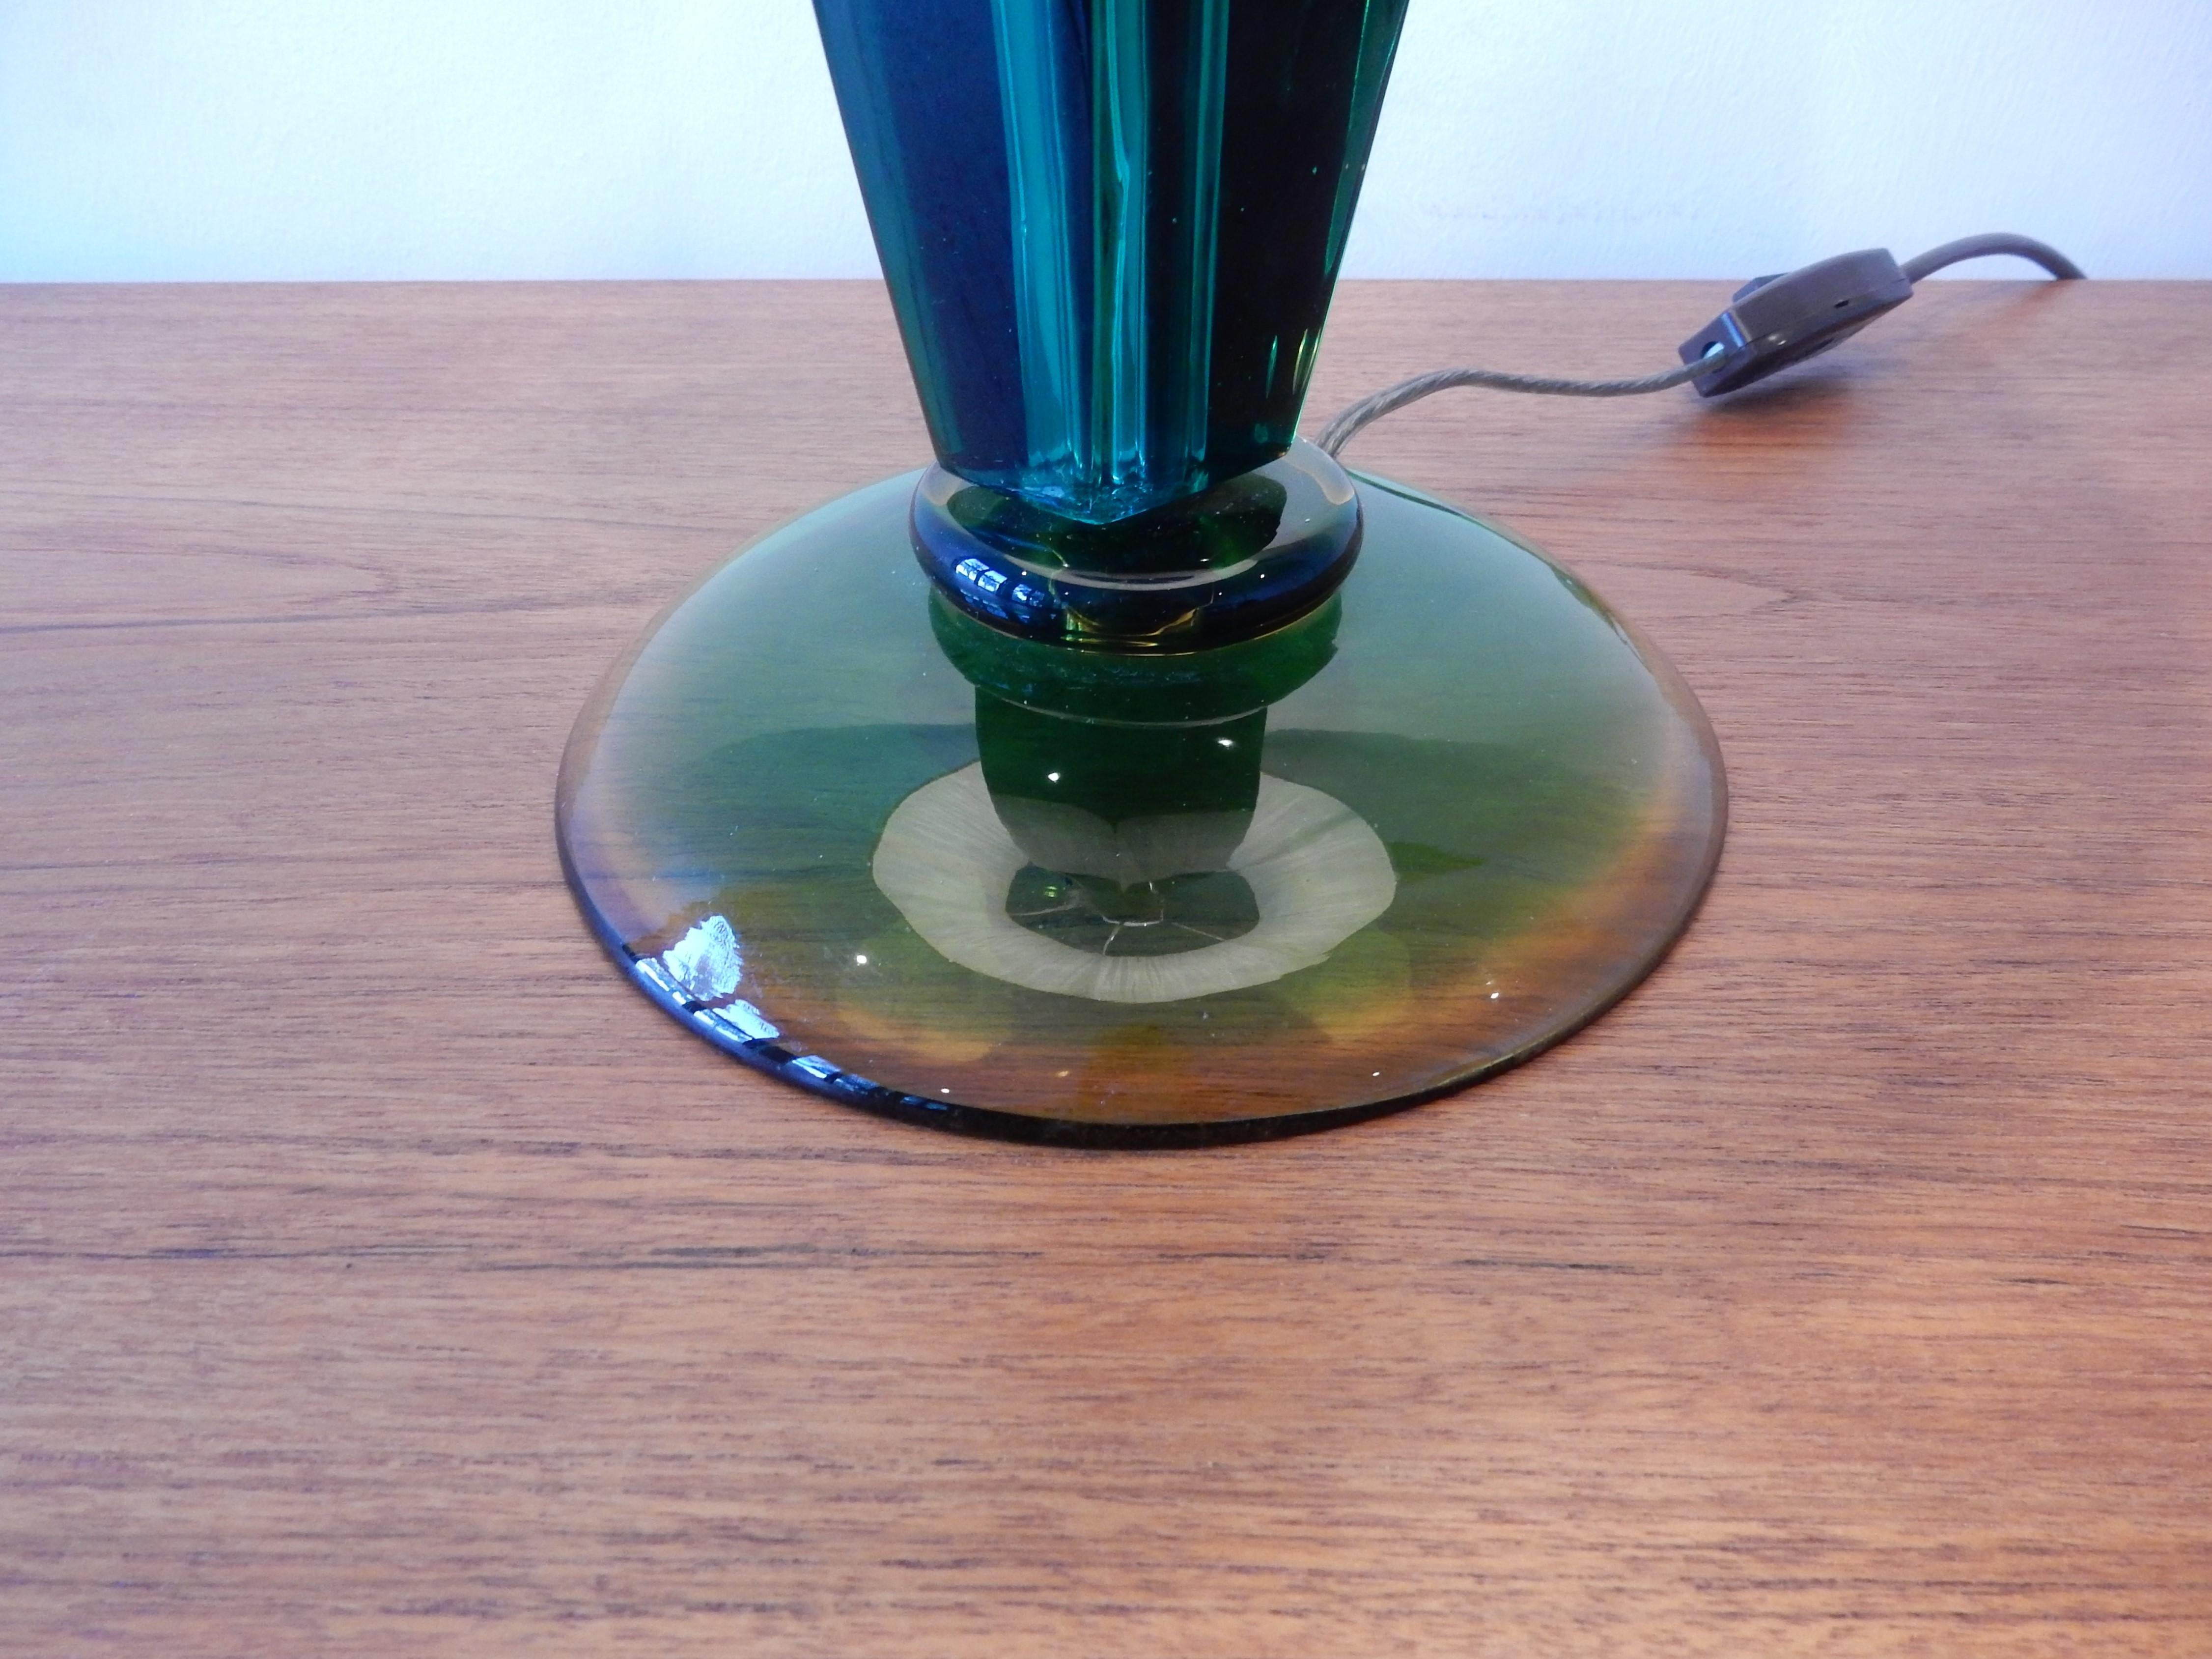 This impressive and heavy Mid-Century Modern lamp base was designed bij Flavio Poli for Seguso, 1960s. This well-crafted translucent green to yellow base is made of high quality Murano glass and creates a beautiful subtle light when the bulb is lit.